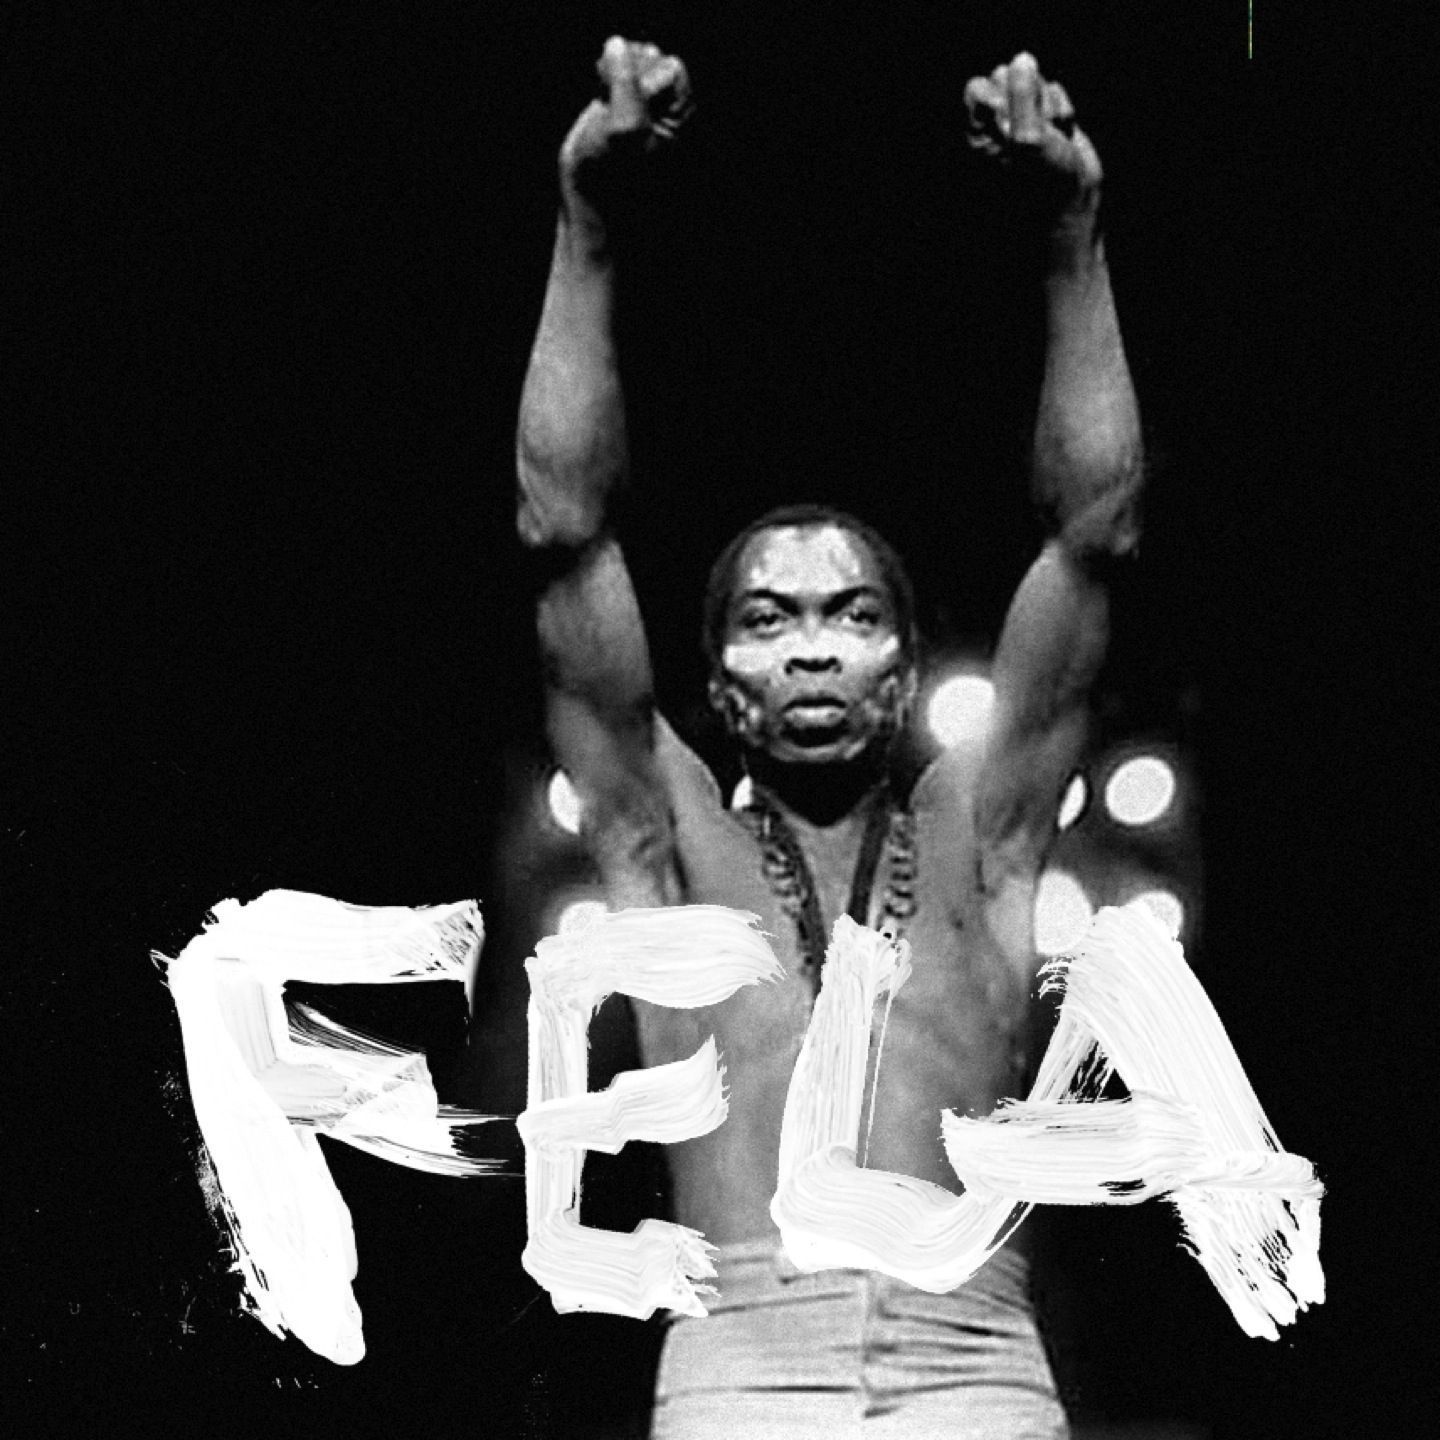 Fela Anikulapo Kuti nominated for 2021 Rock and Roll Hall of Fame